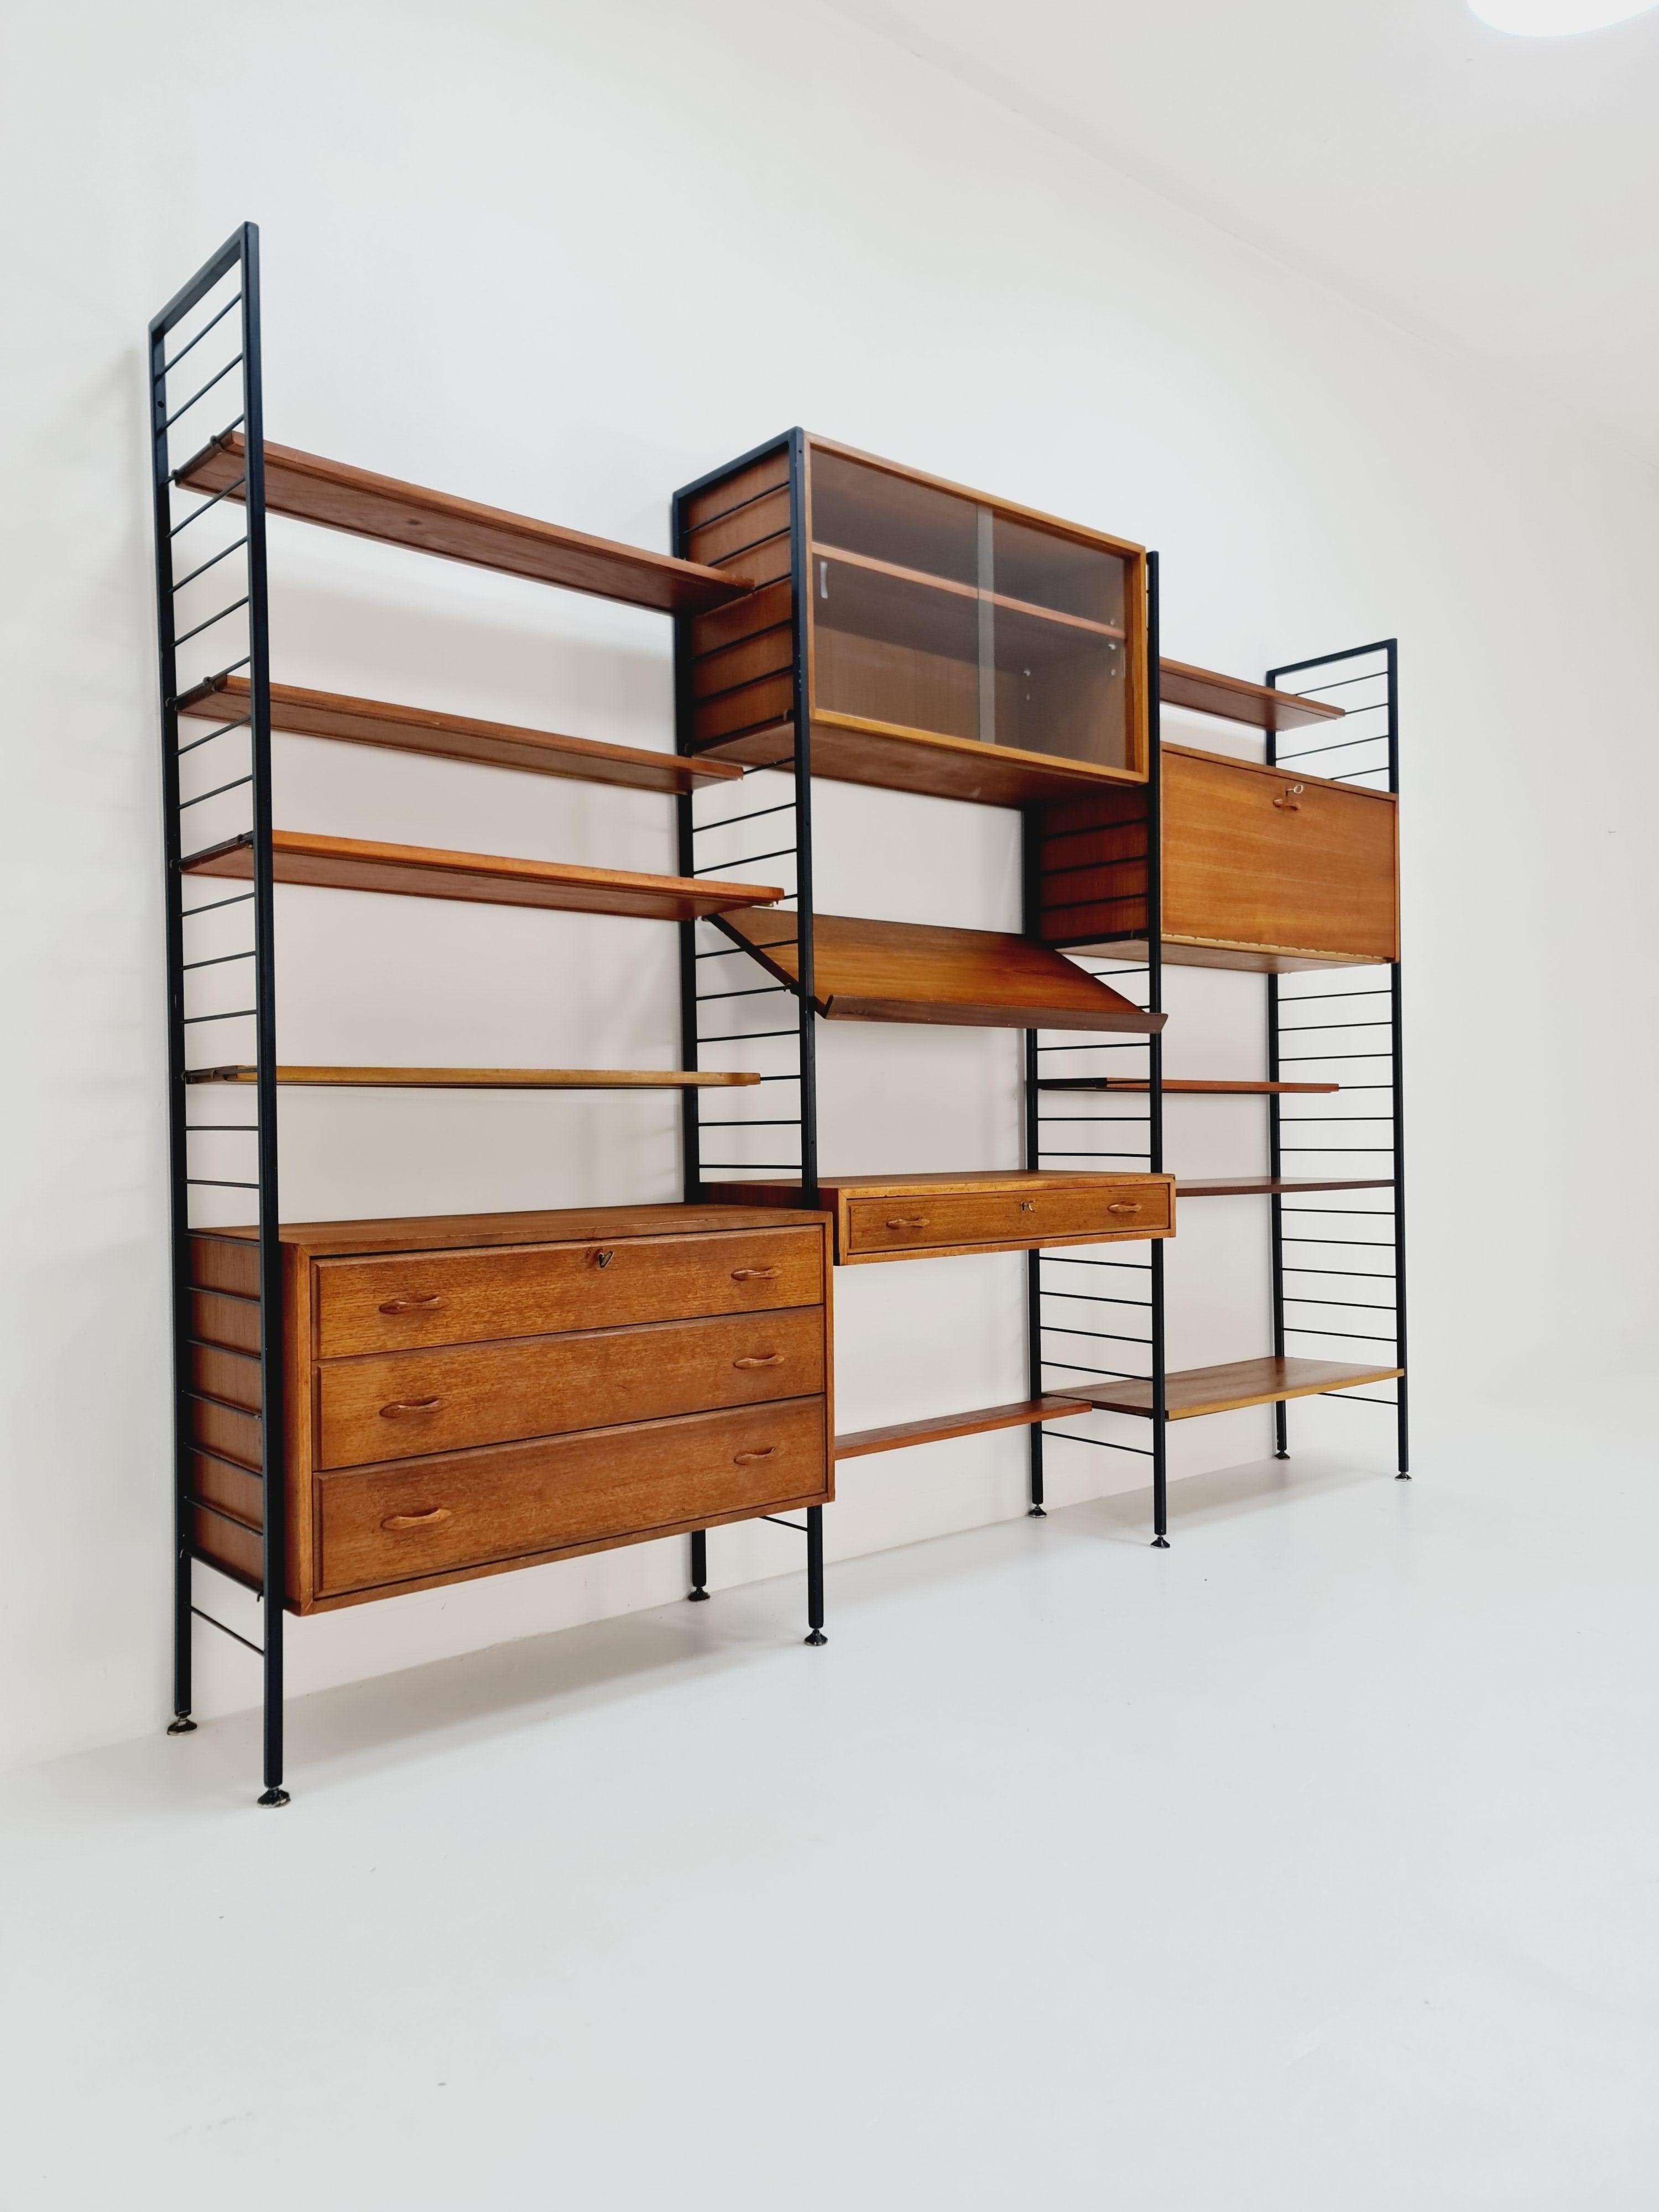 Free standing Mid century vintage modular unit shelving system by Staples Ladderax, London,  1960s

Designed by Staples and C.O.LTD London, Marked

Modular -- The individual units and shelves can have multiple configuration options - Featuring a